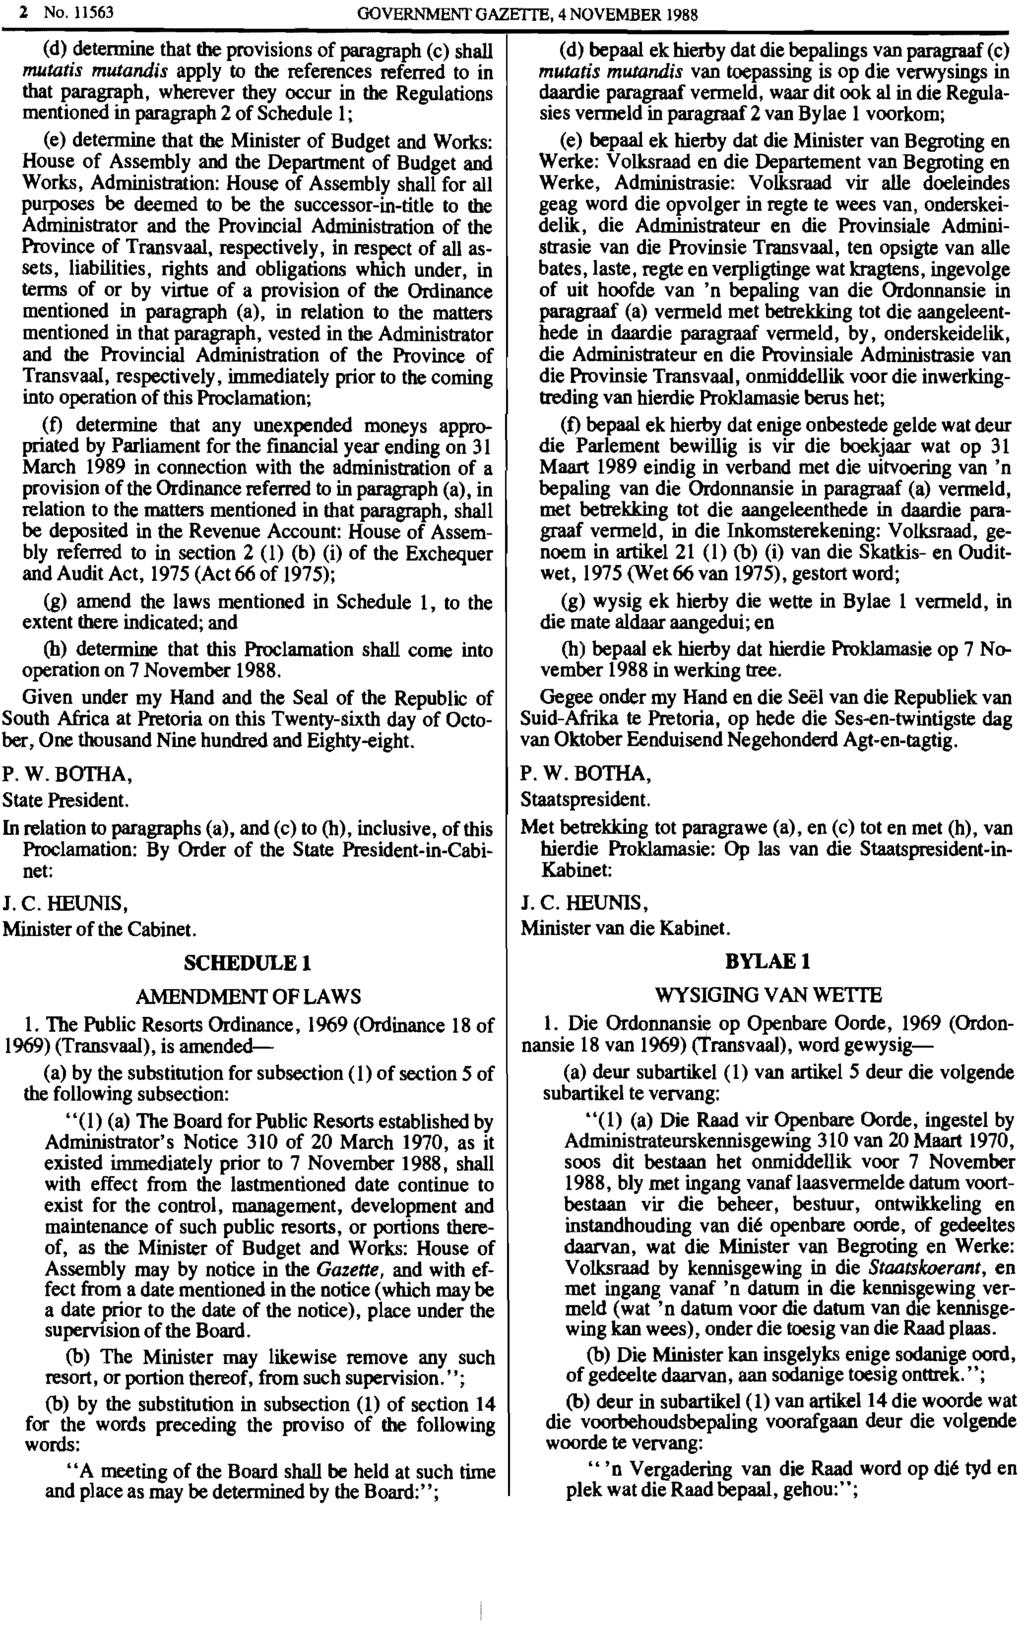 2 No. 11563 GOVERNMENT GAZEITE, 4 NOVEMBER 1988 (d) determine that the provisions of paragraph (c) shall mutatis mutandis apply to the references referred to in that paragraph, wherever they occur in